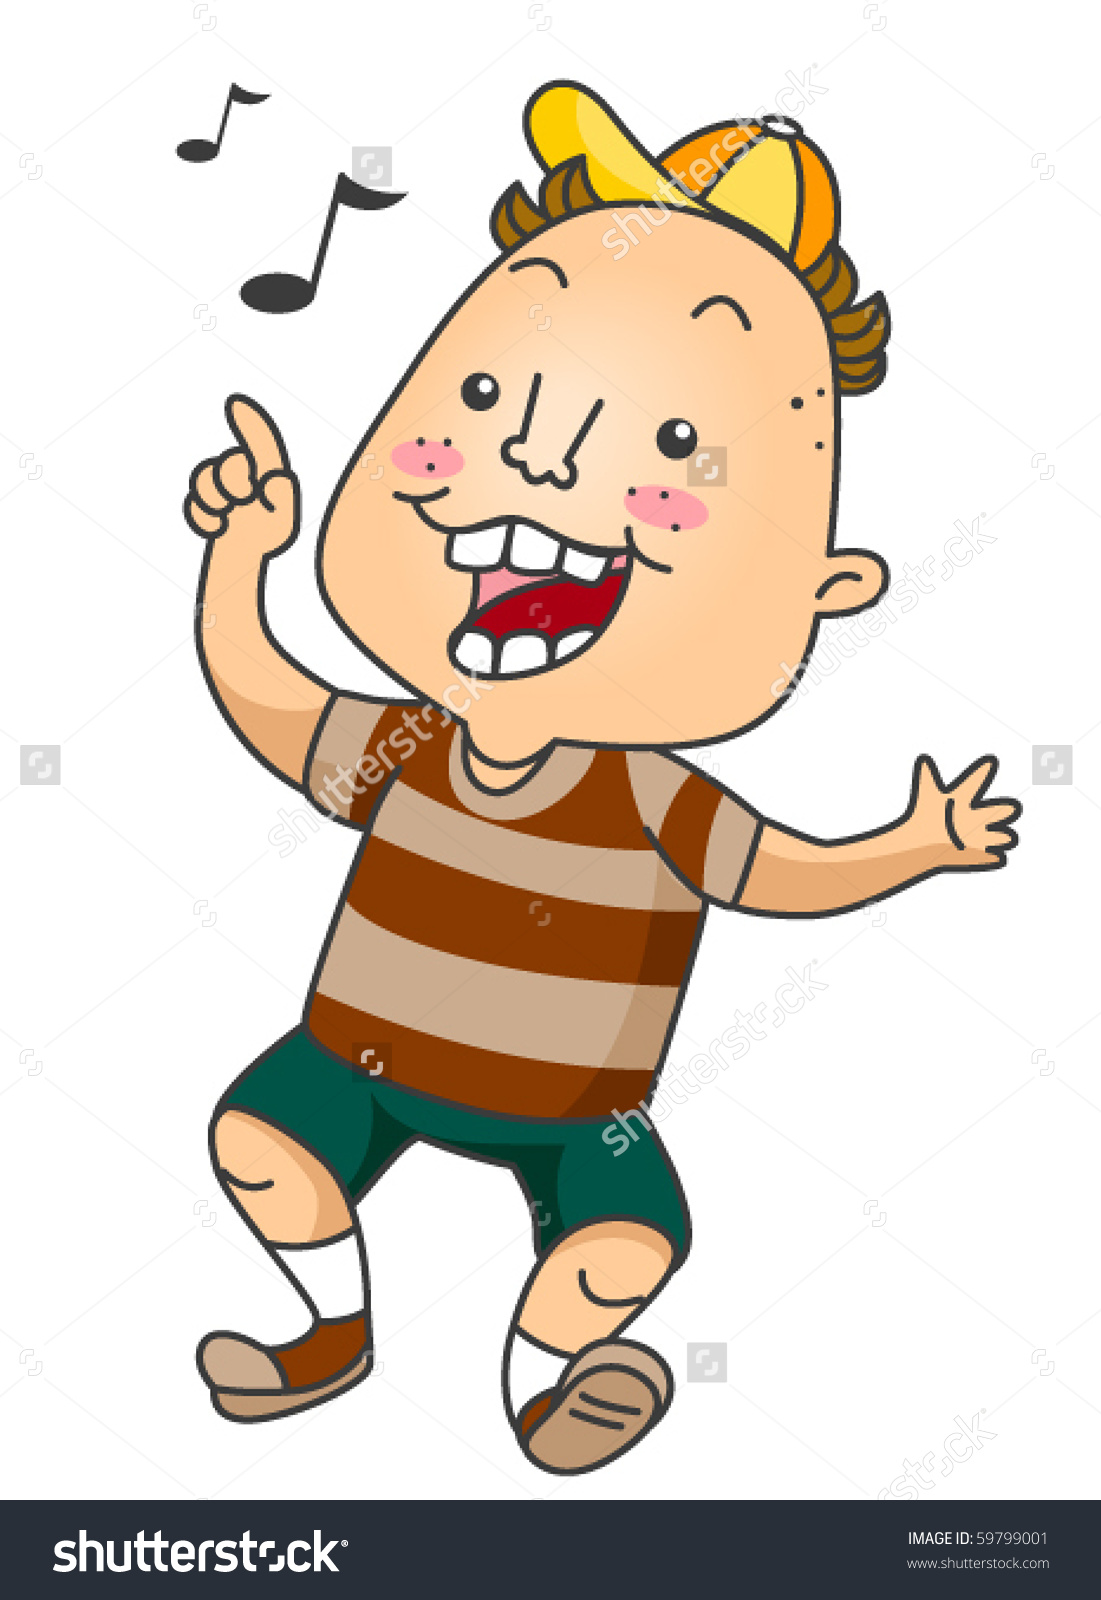 A Cheerful Kid Singing A Song.